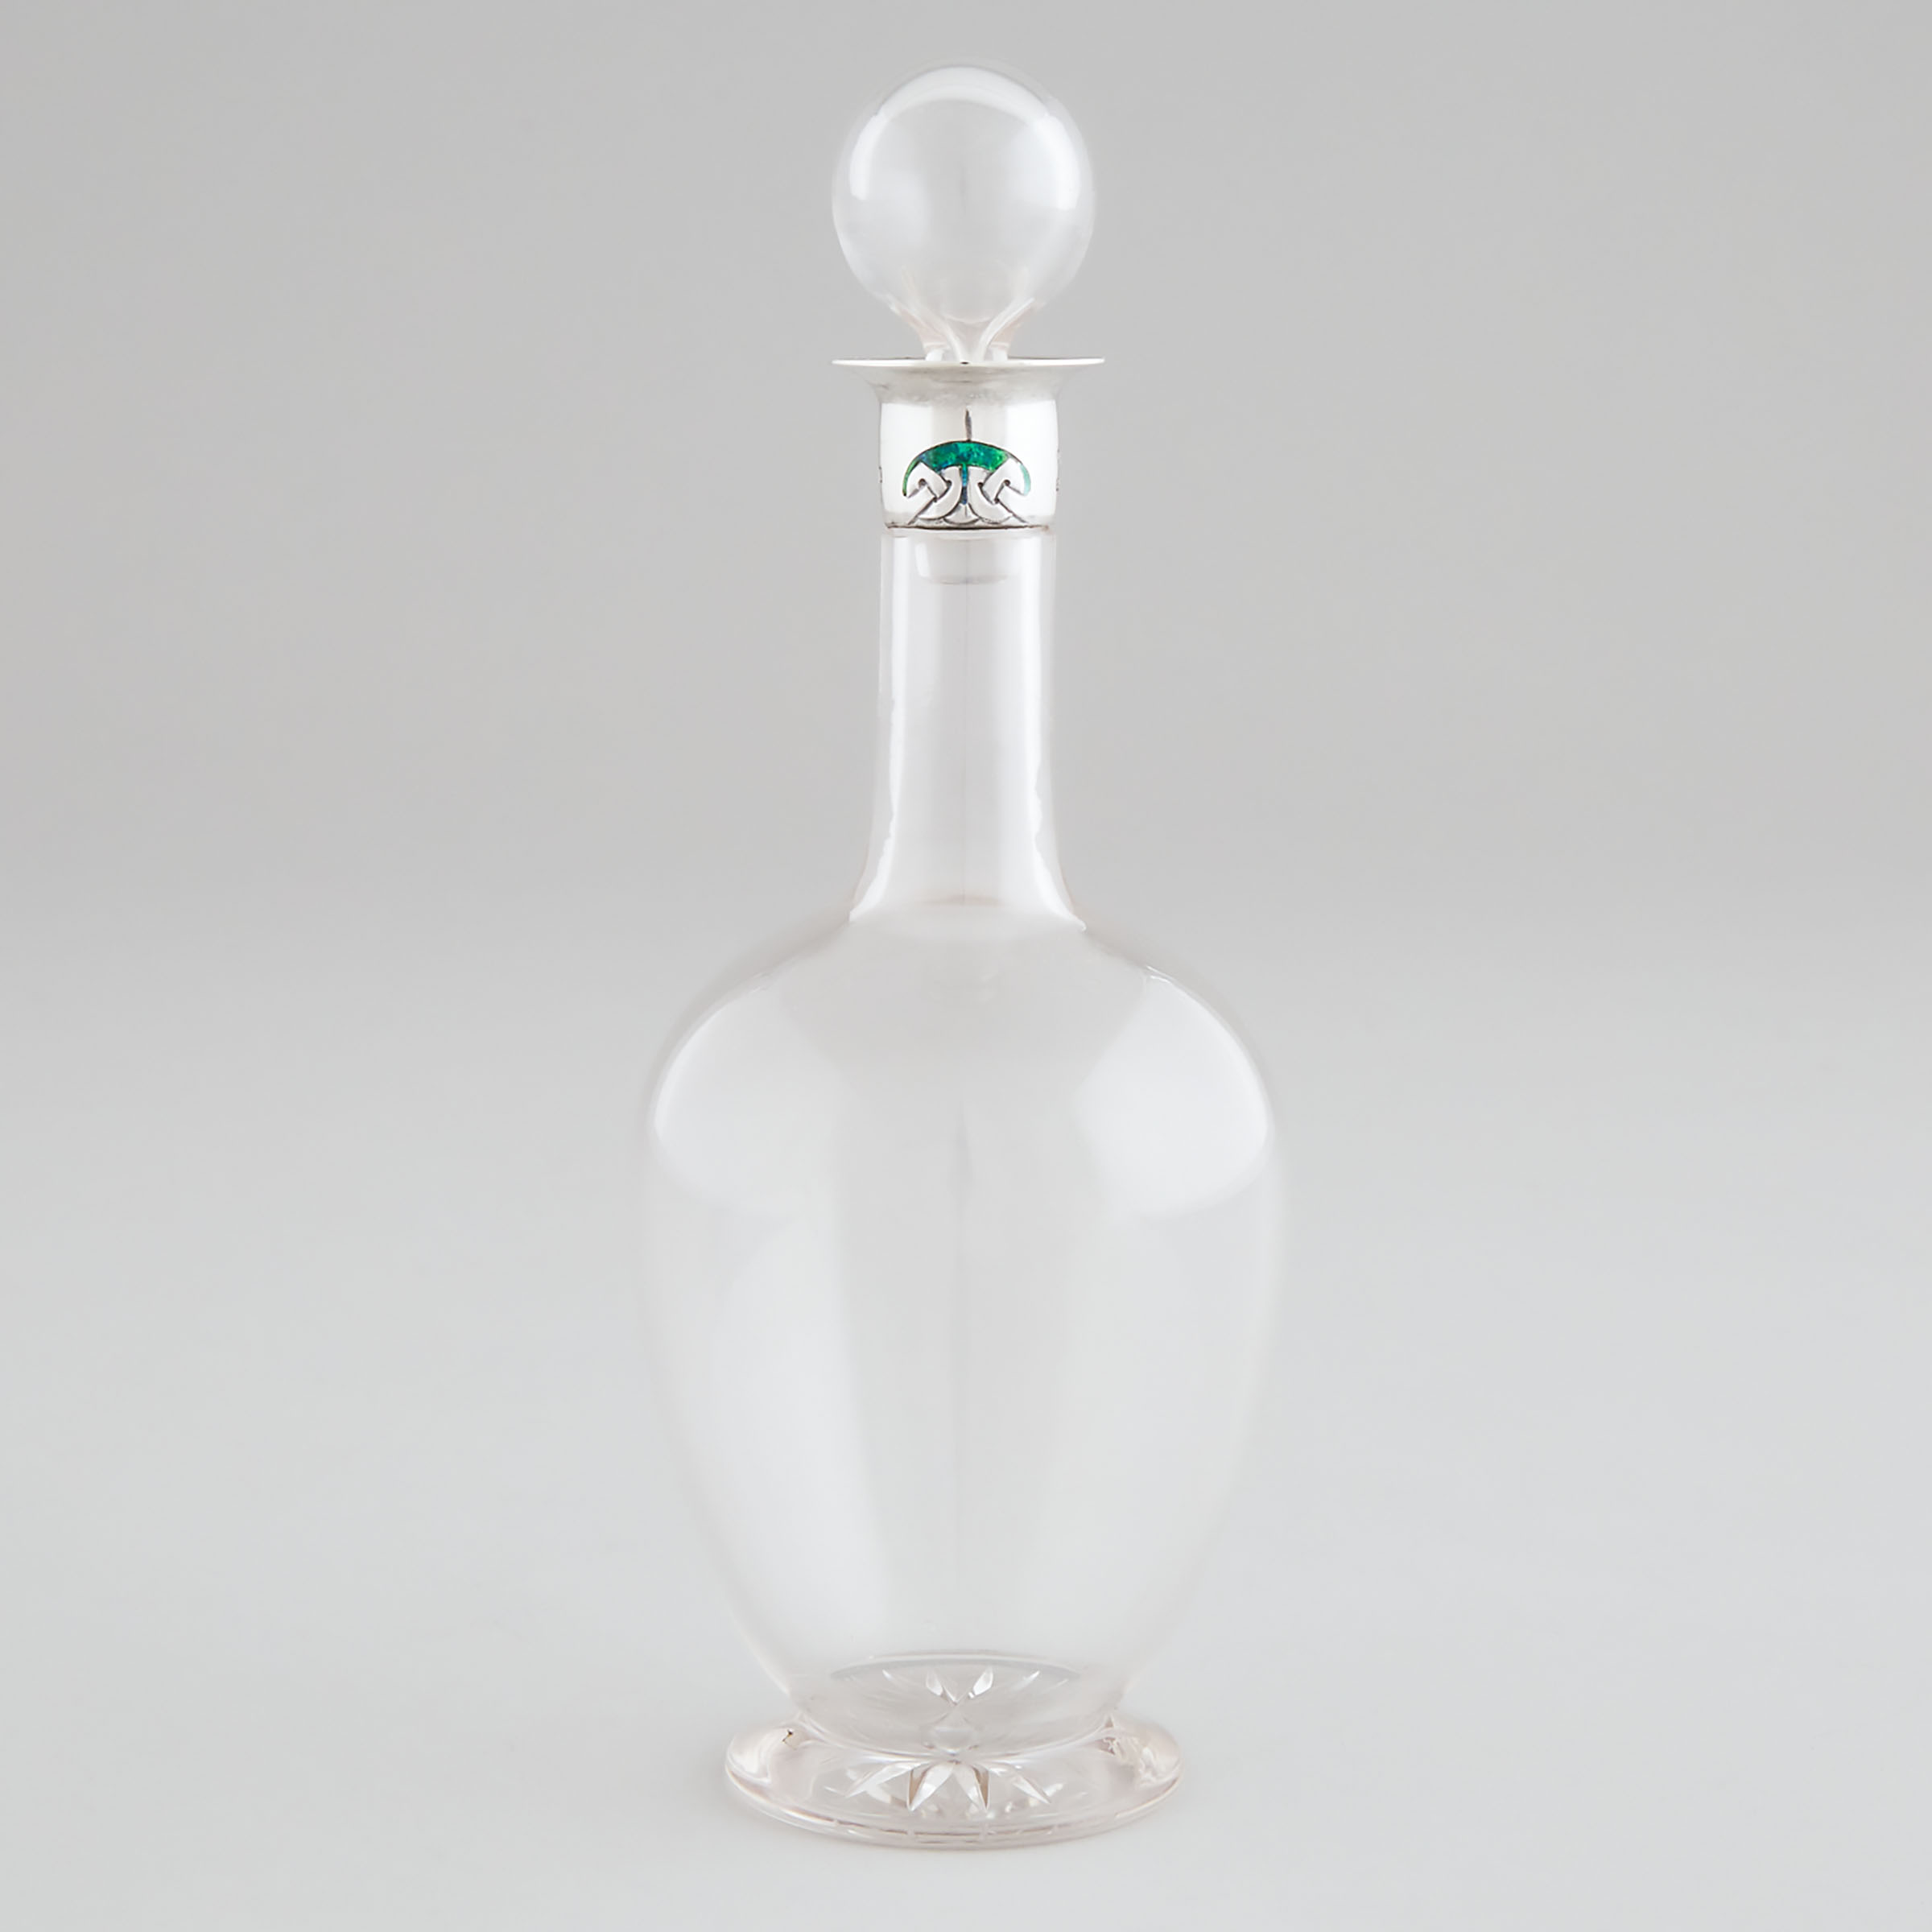 Edwardian Arts & Crafts 'Cymric' Enameled Silver Mounted Glass Decanter, Archibald Knox for Liberty & Co., Birmingham, 1905